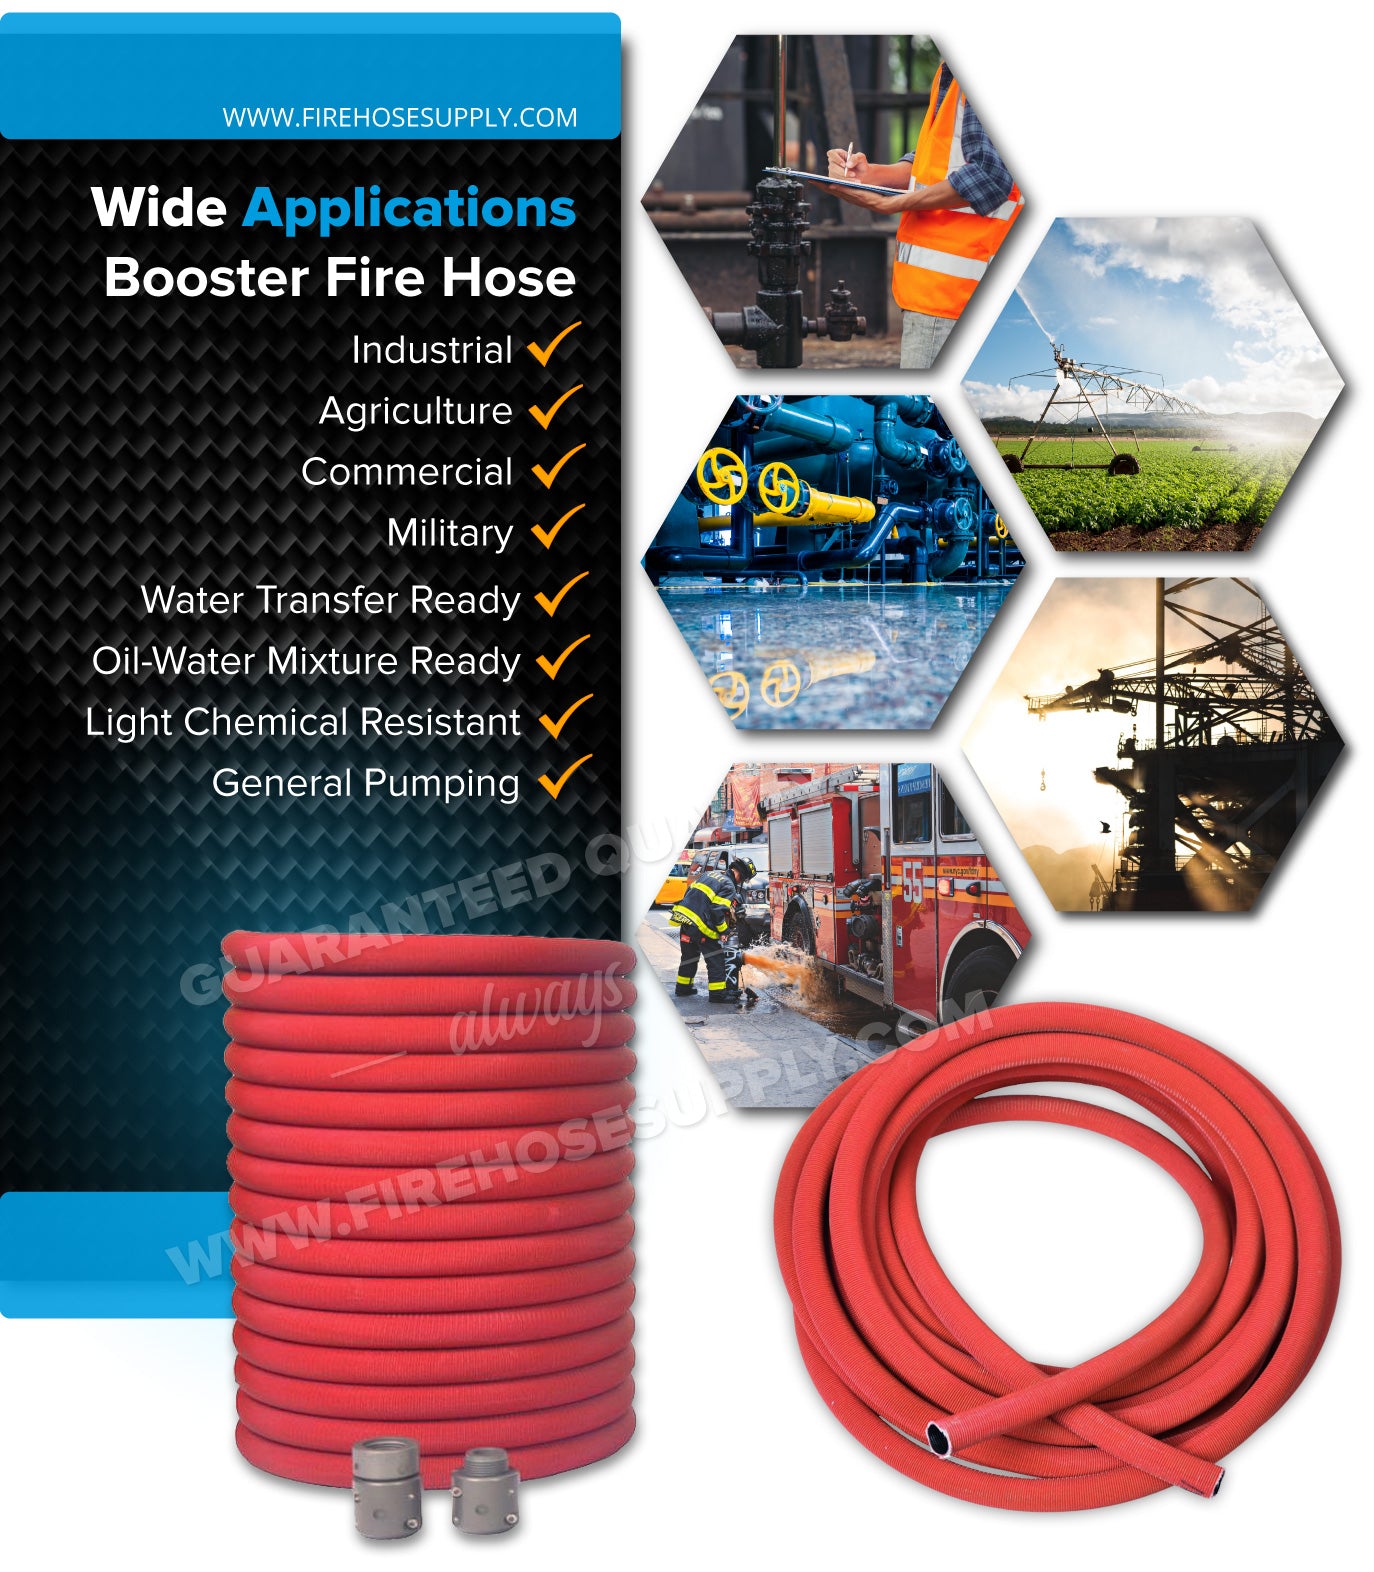 1 Inch Booster Fire Hose Uncoupled Hose Only Benefits 300psi